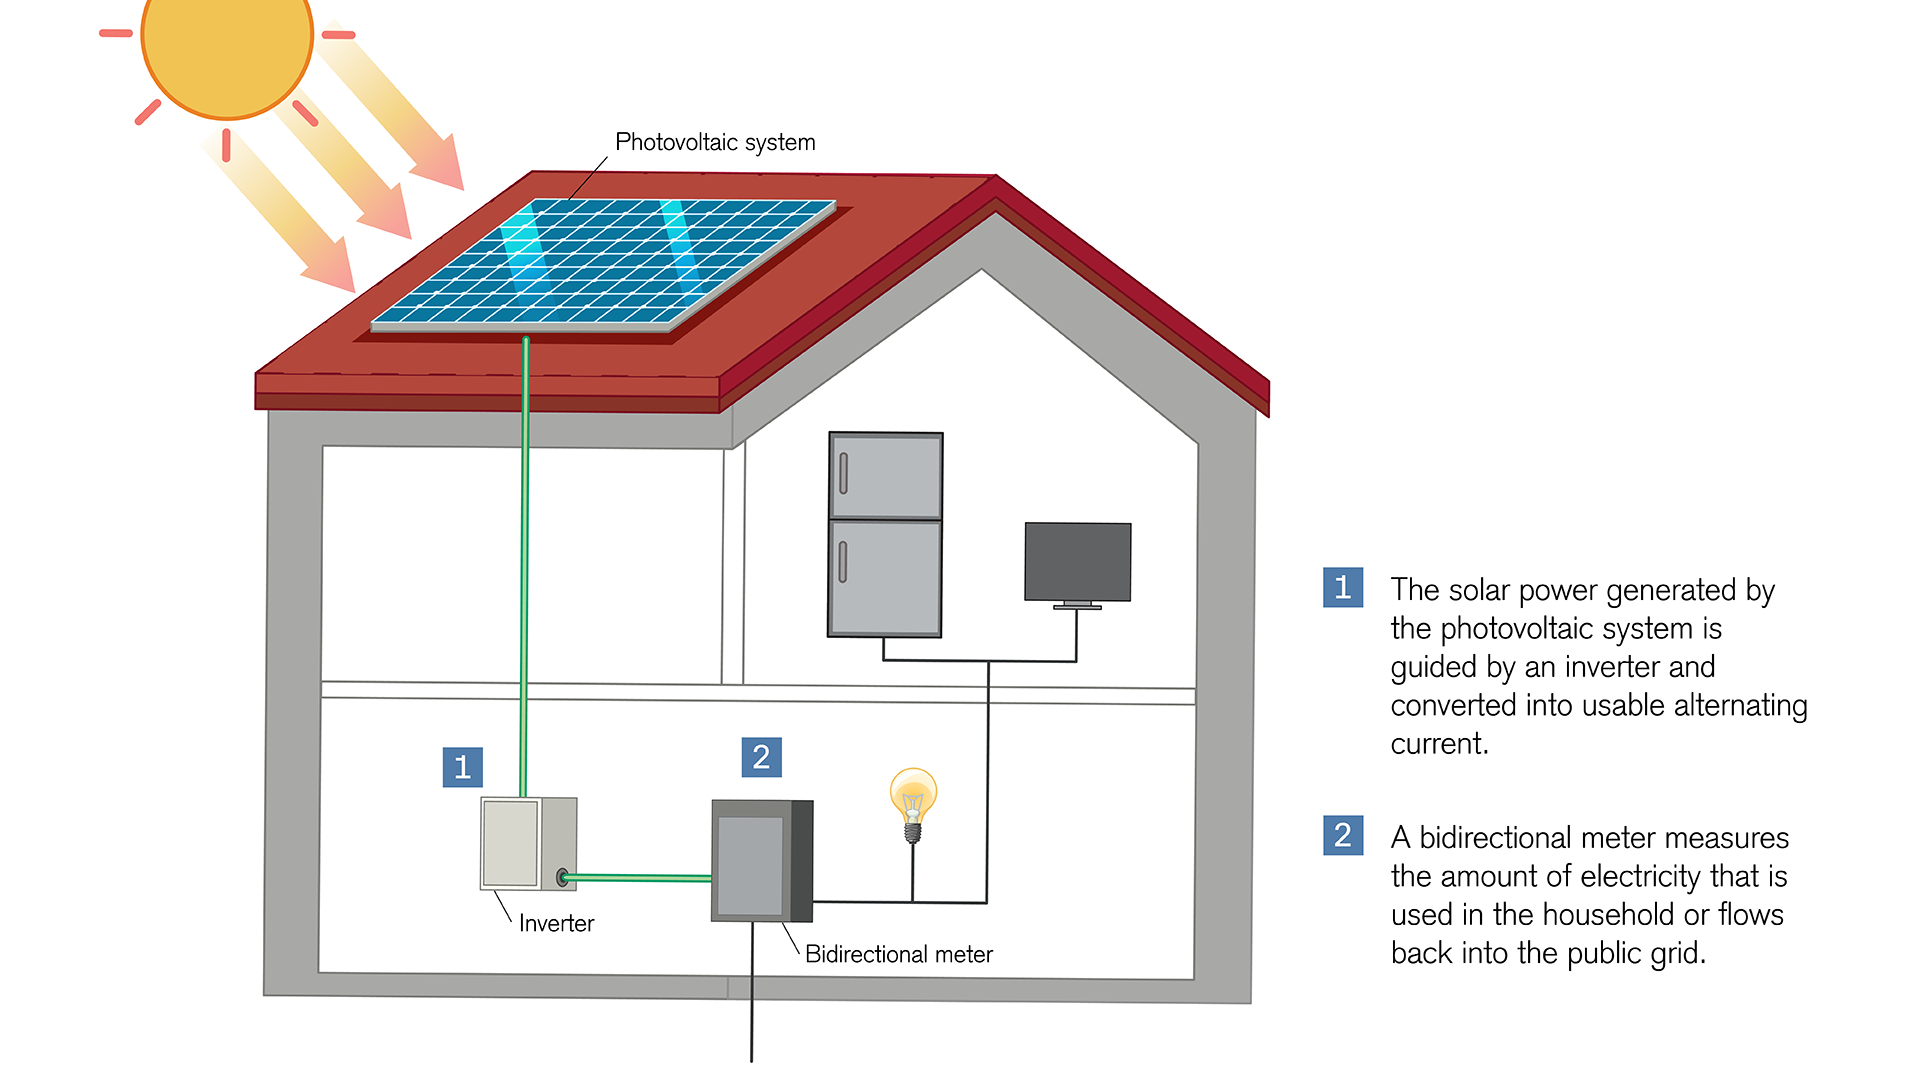 Photovoltaic system: Conversion of sunlight into electricity